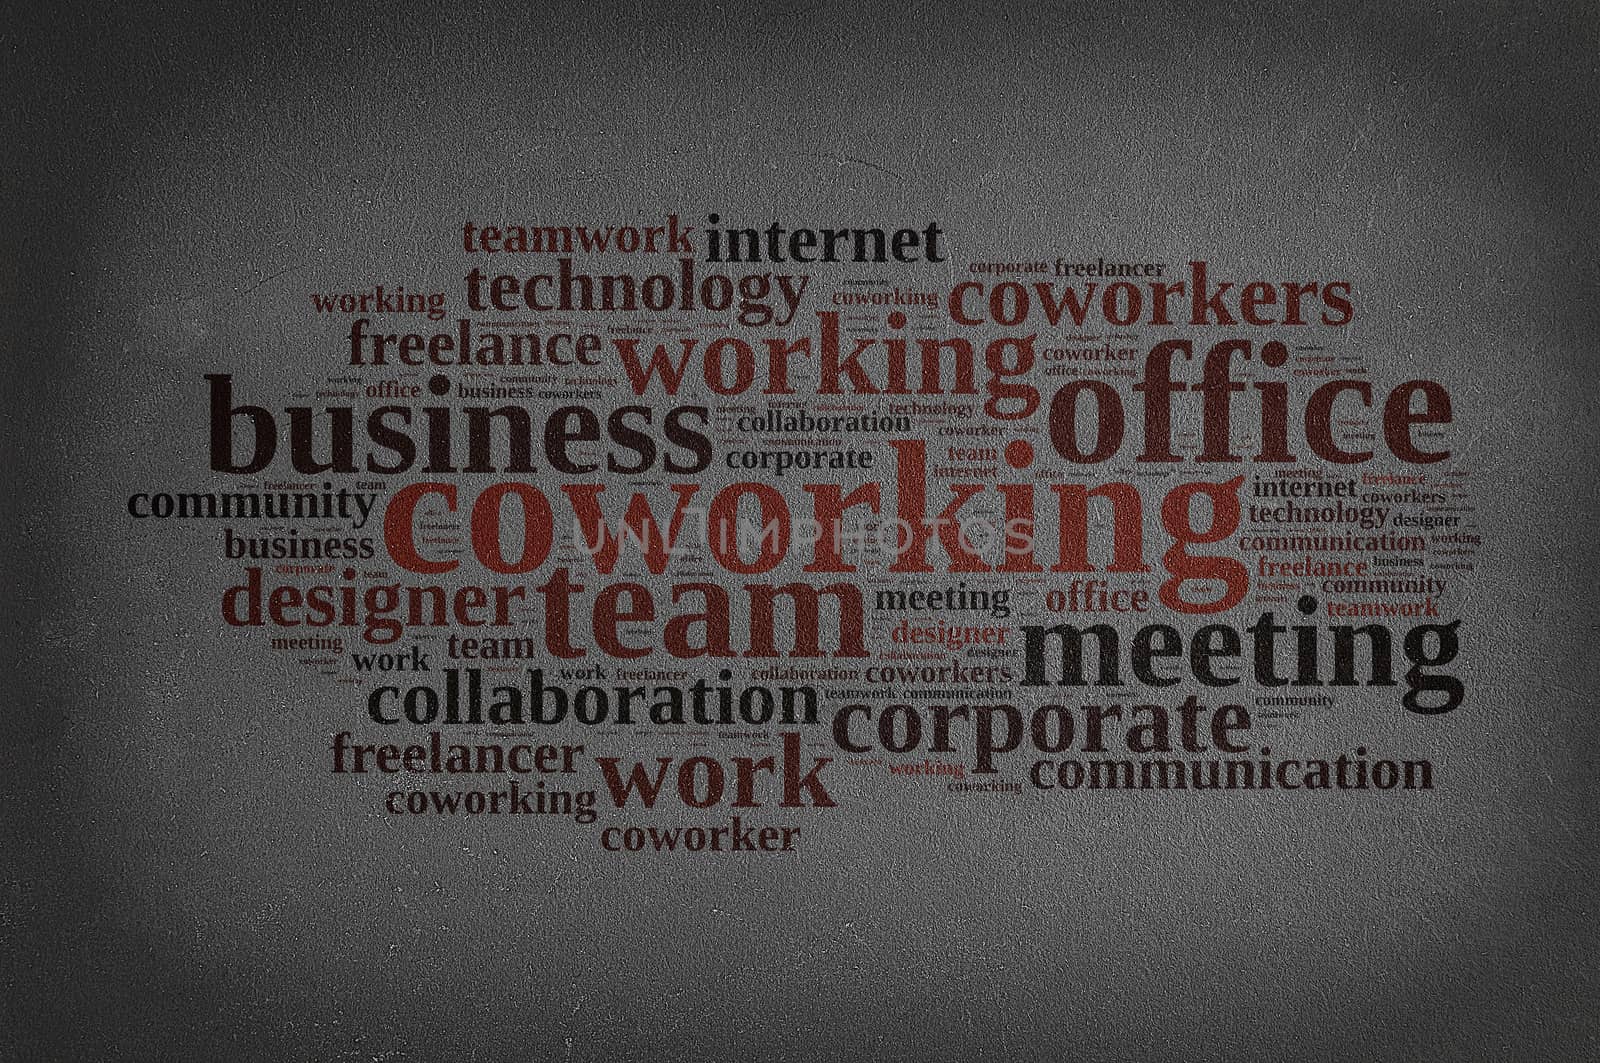 Illustration with word cloud with the word coworking.